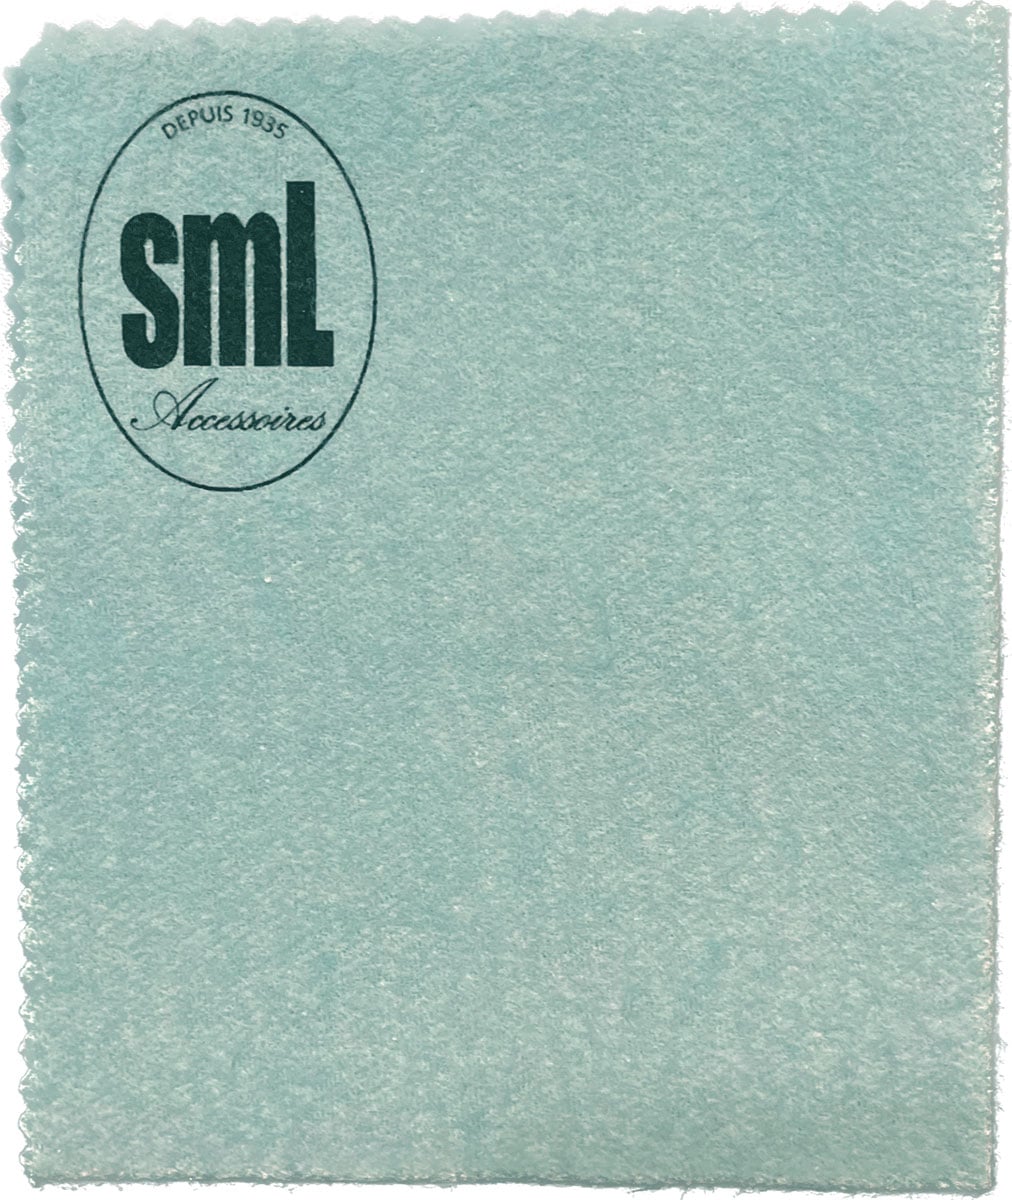 SML PARIS IMPREGNATED CLEANING CLOTH - SOLID SILVER